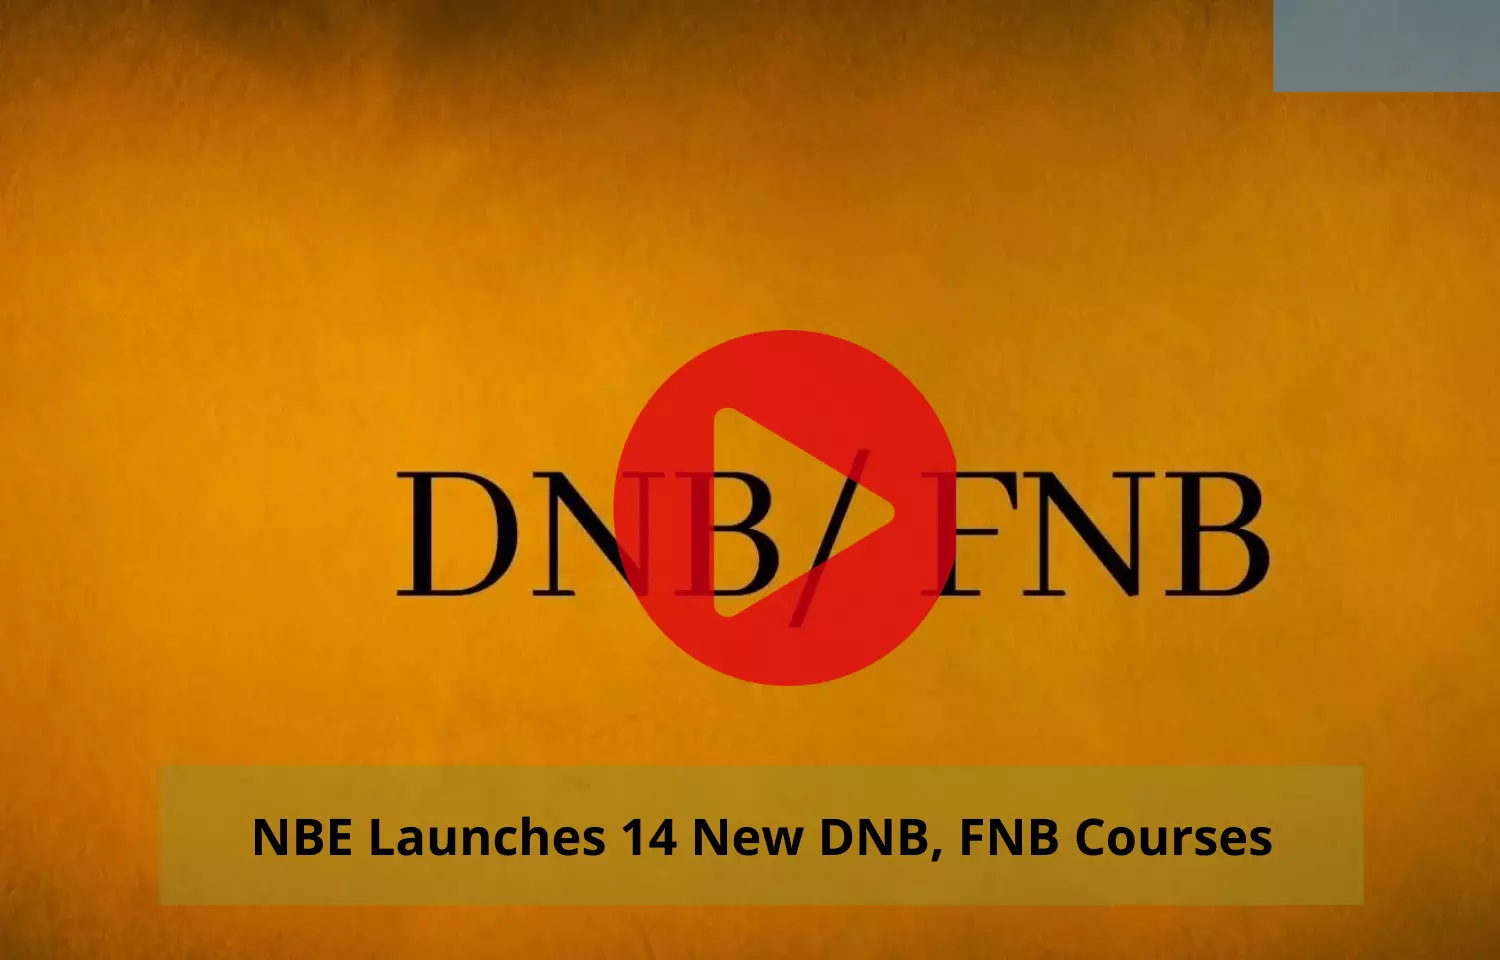 NBE launches 14 new DNB, FNB courses